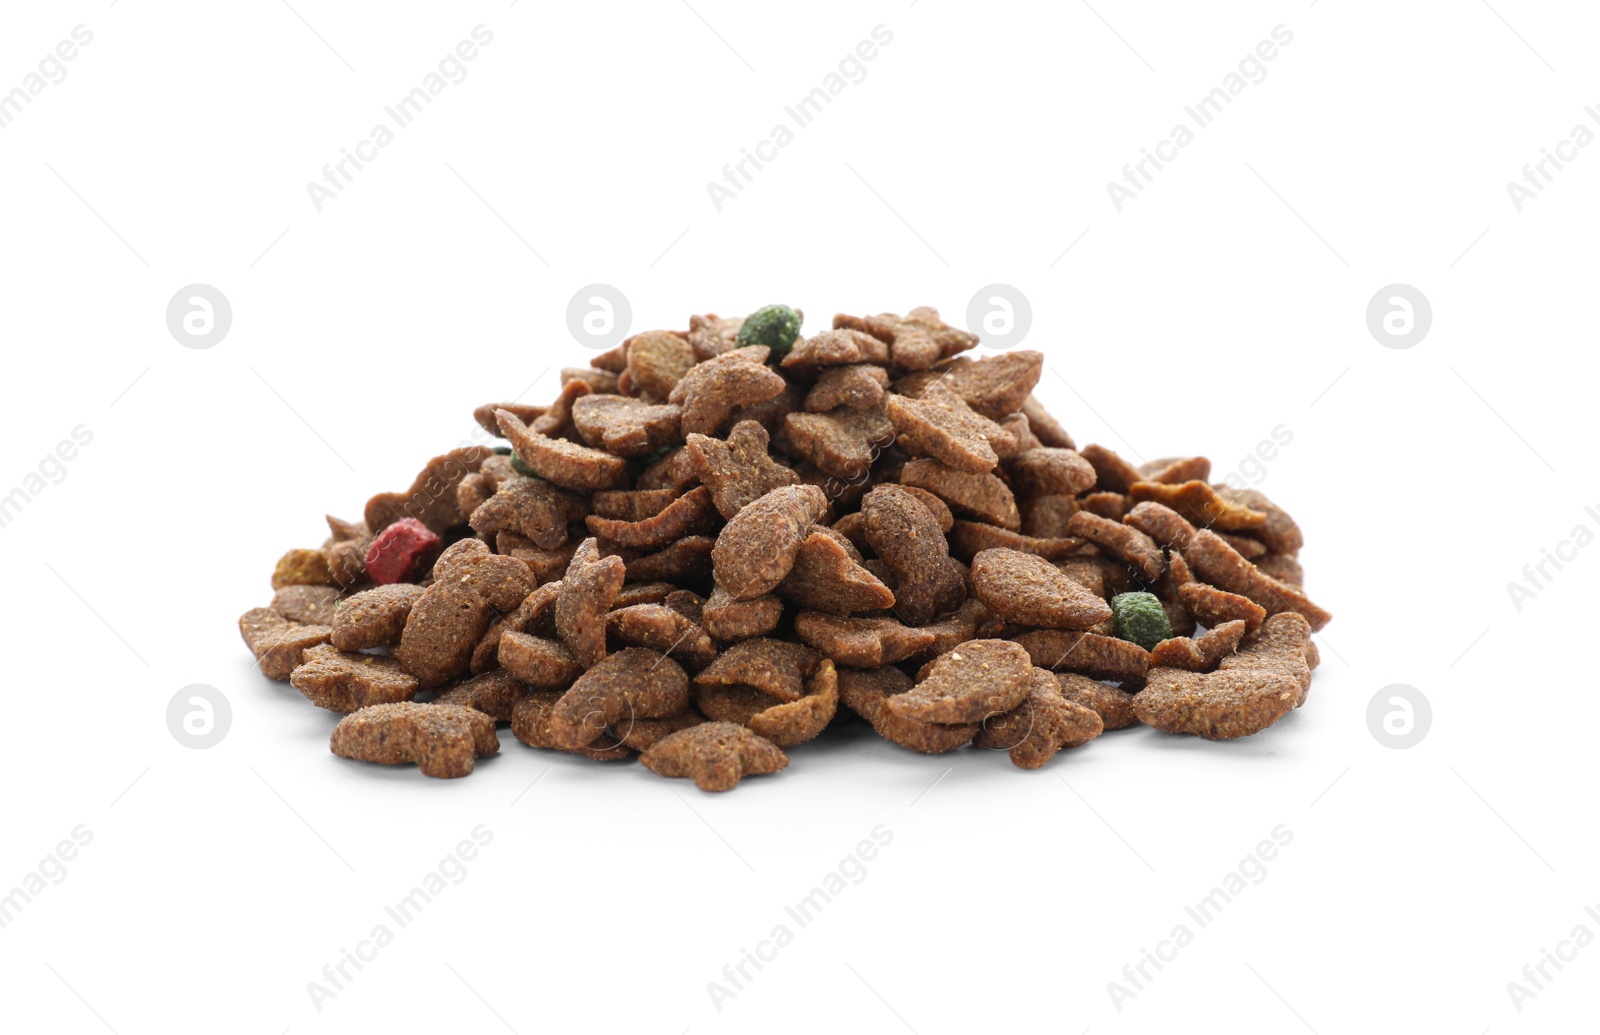 Photo of Pile of dry pet food on white background